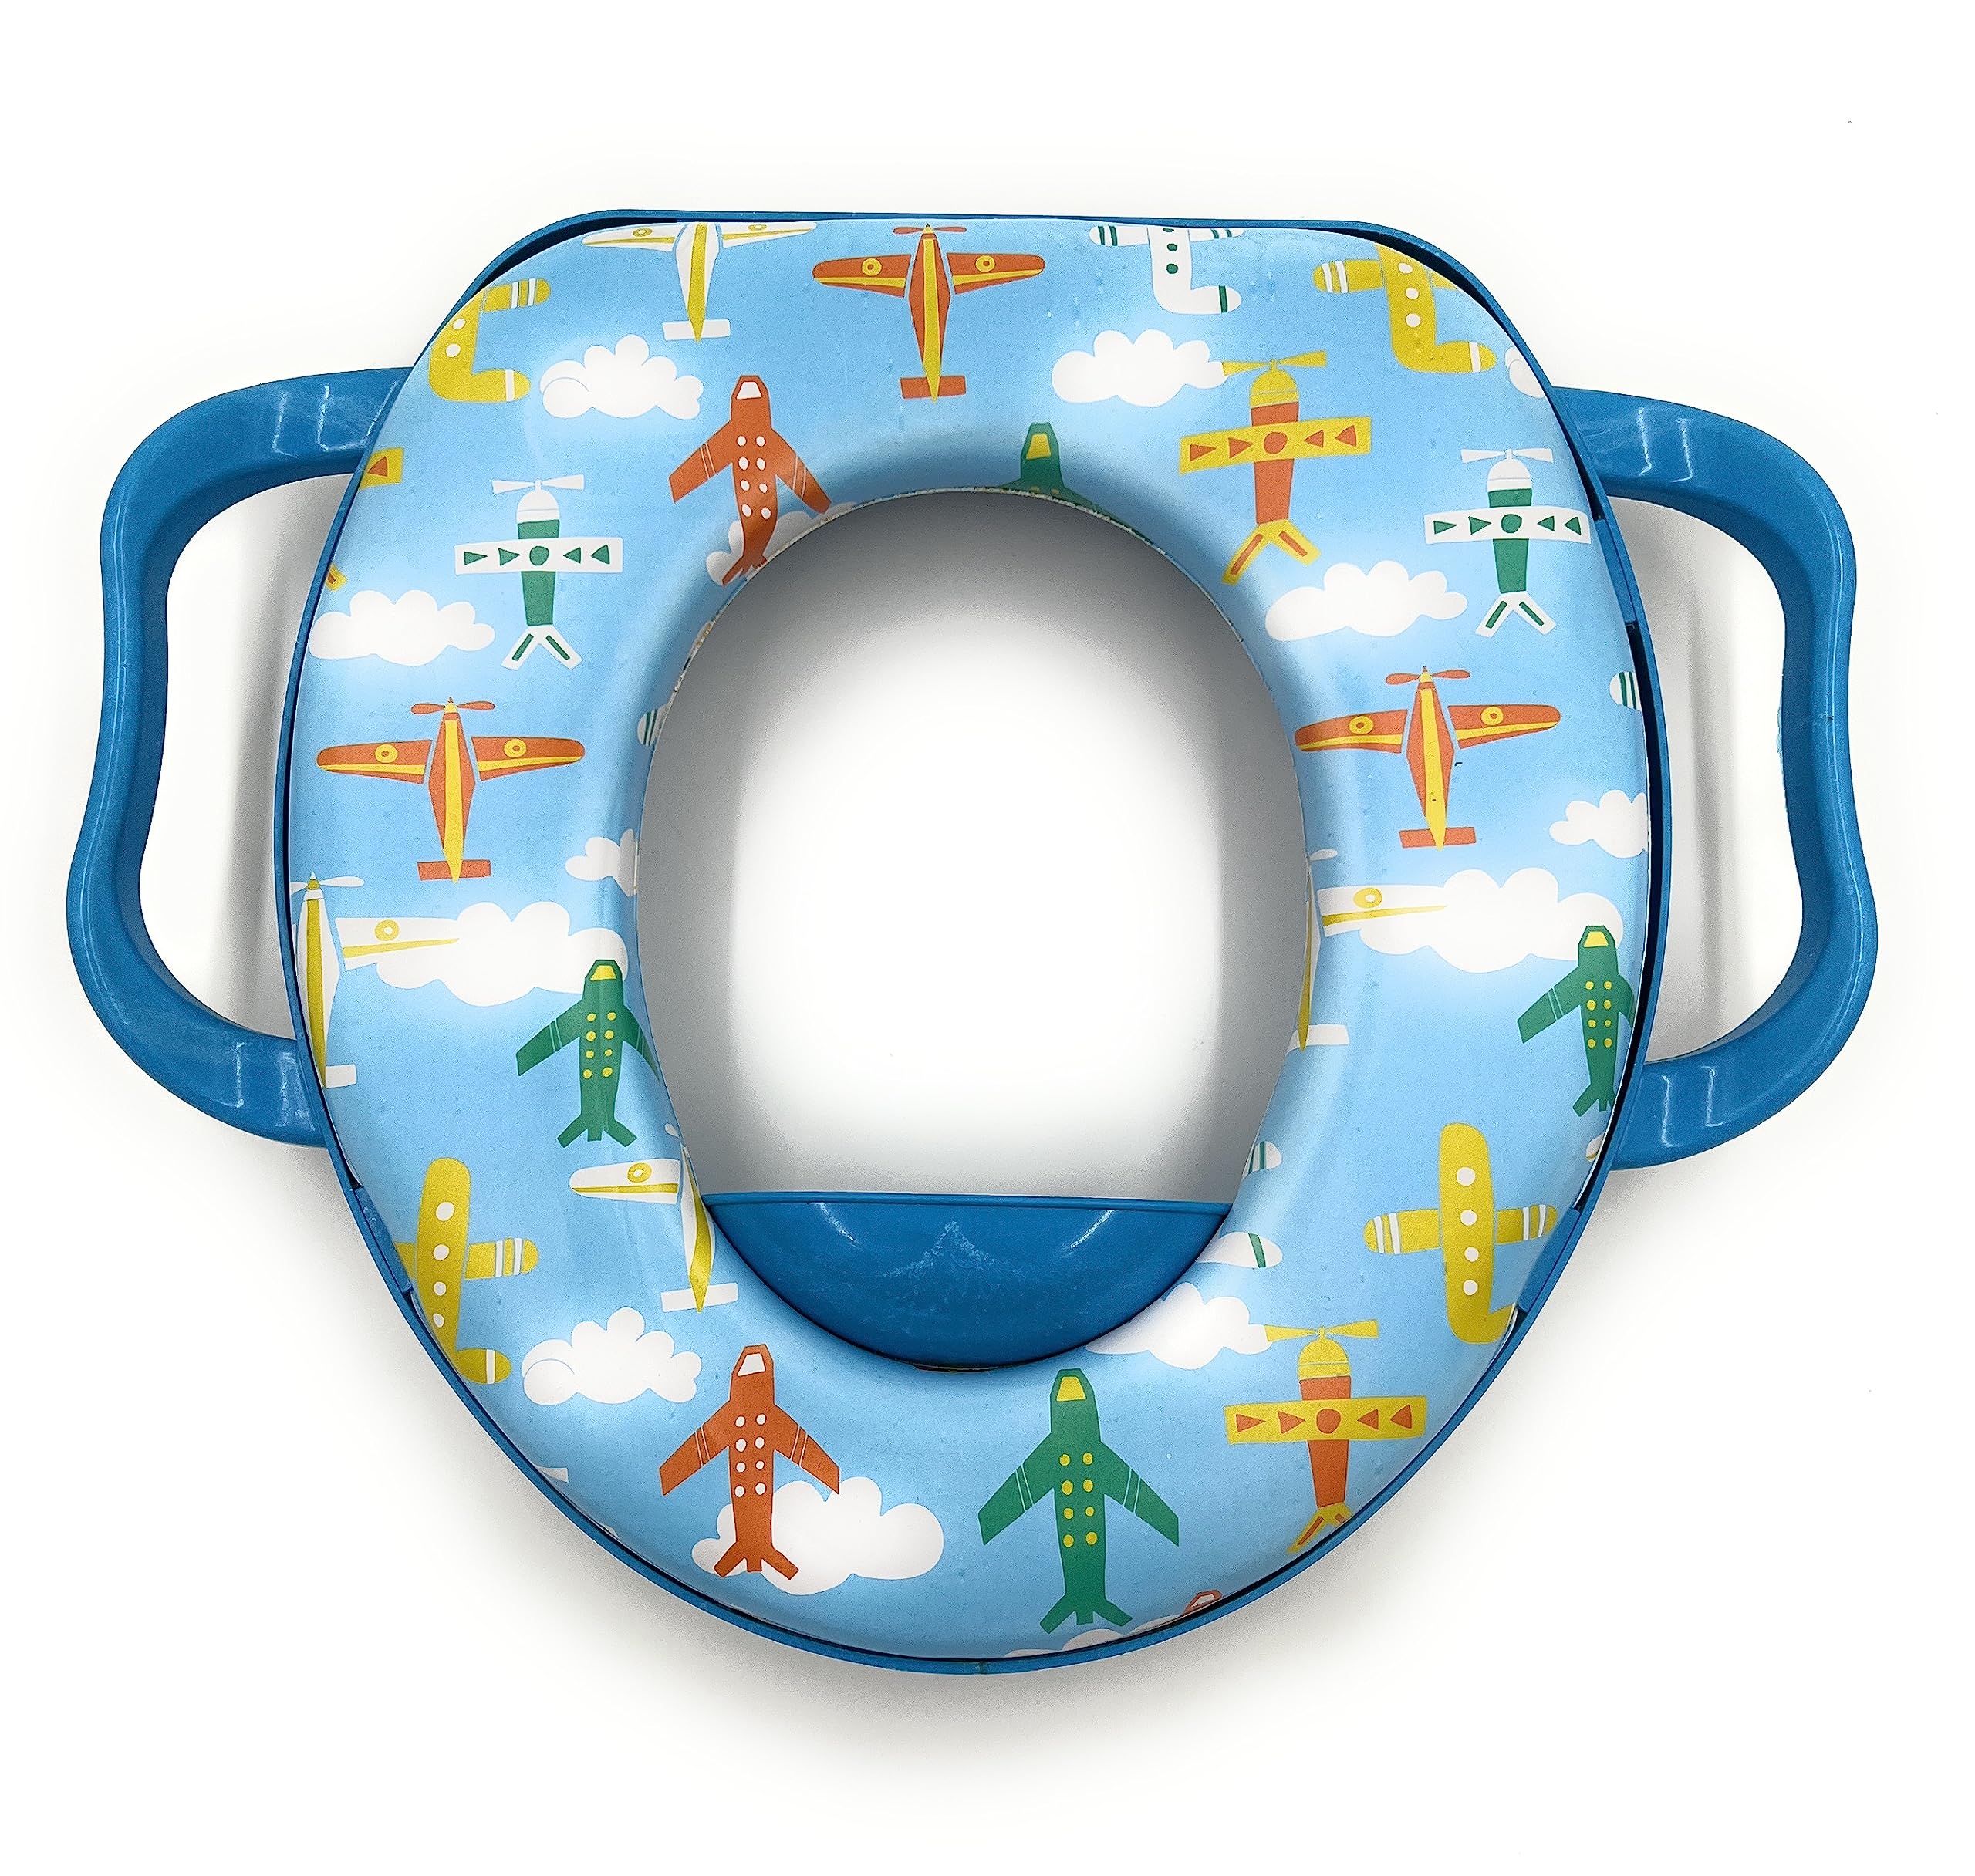 VIO Cushioned Children's Toilet Seat, Baby, Toddler, Child, Kids Adapter Toilet Seat with Handles, Potty Training Seat for Western Toilet, for Boys & Girls, Fits Round & Oval Toilets (Blue Printed)